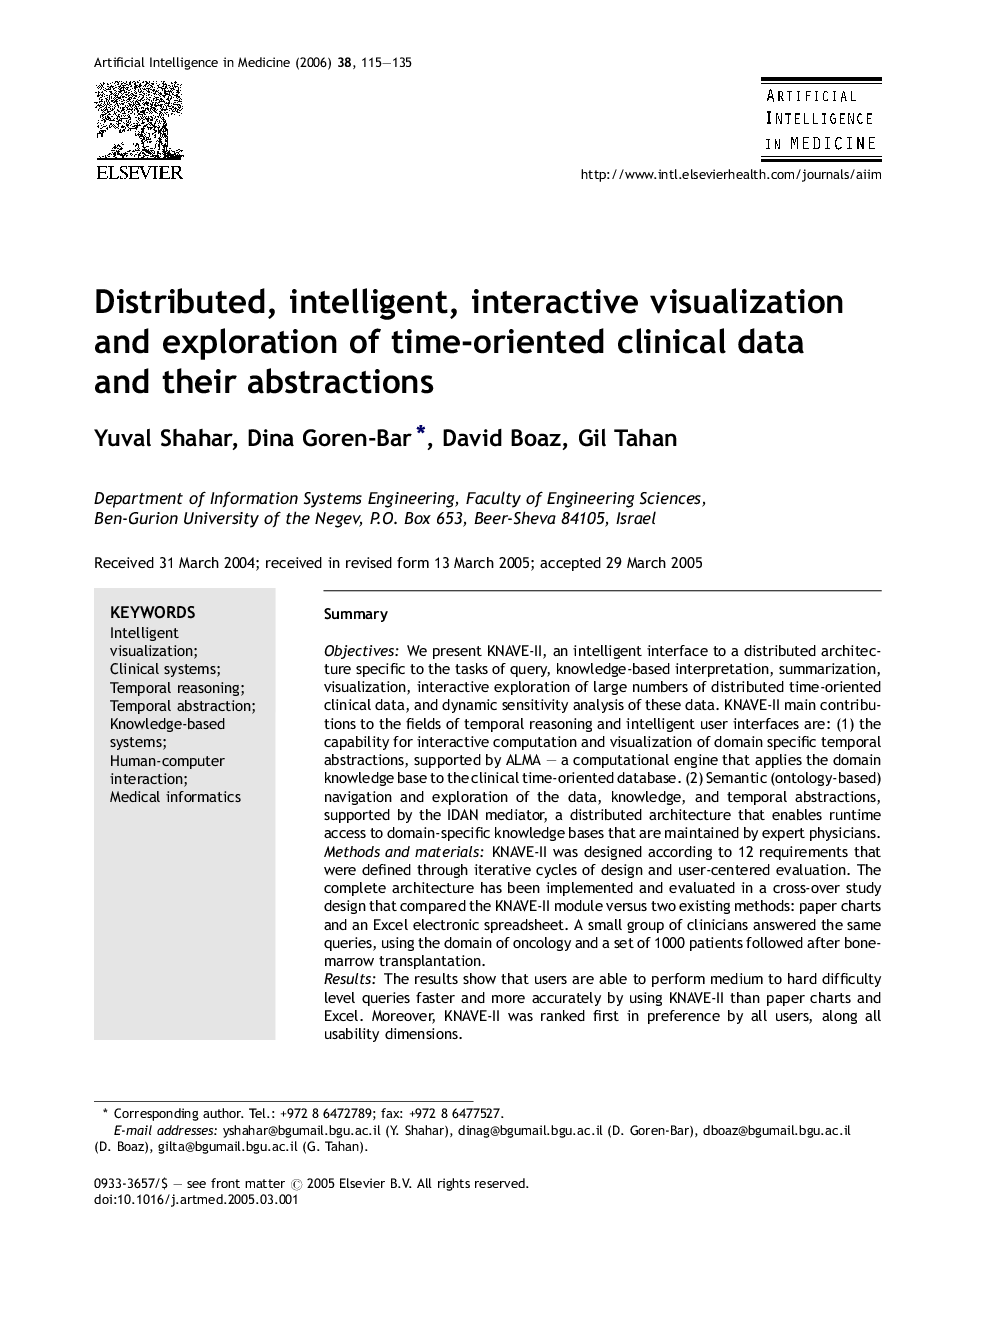 Distributed, intelligent, interactive visualization and exploration of time-oriented clinical data and their abstractions